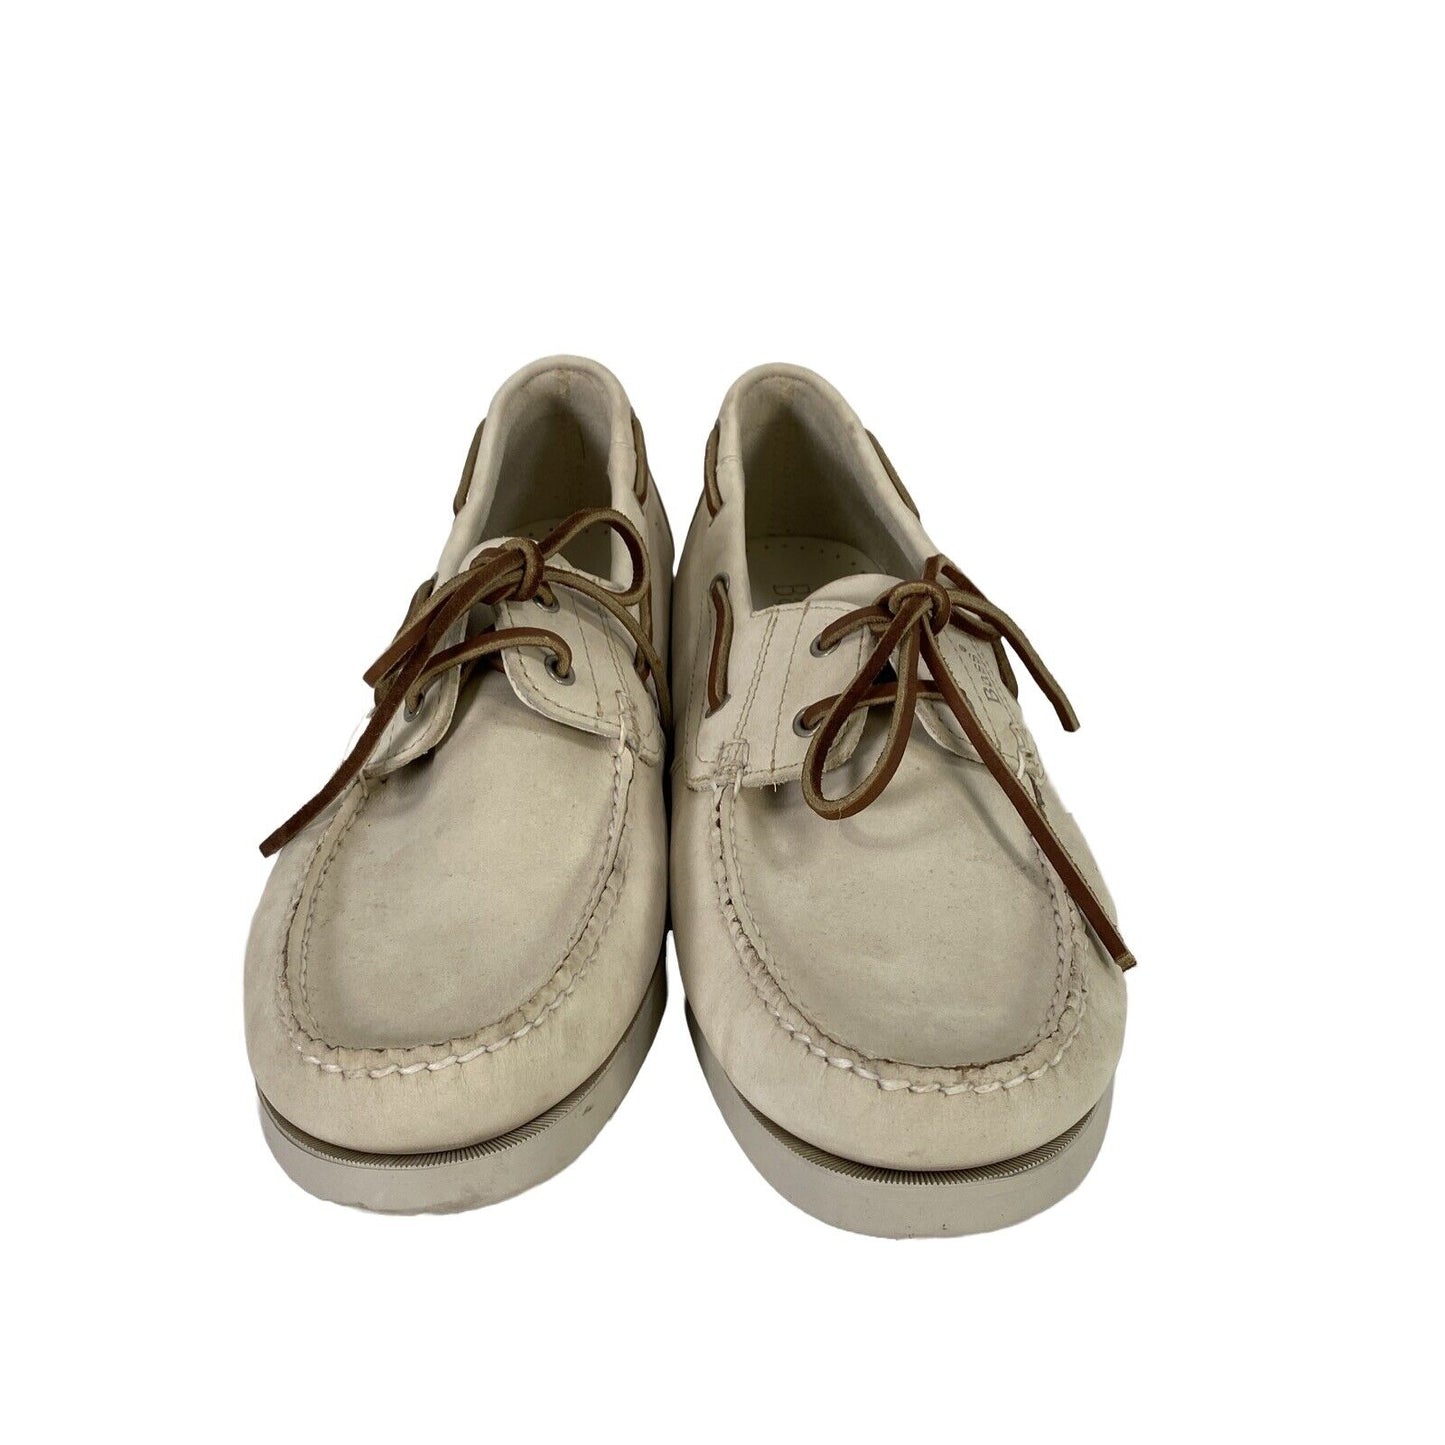 Bass Men's Ivory Seafarer Casual Boat Shoes - 10